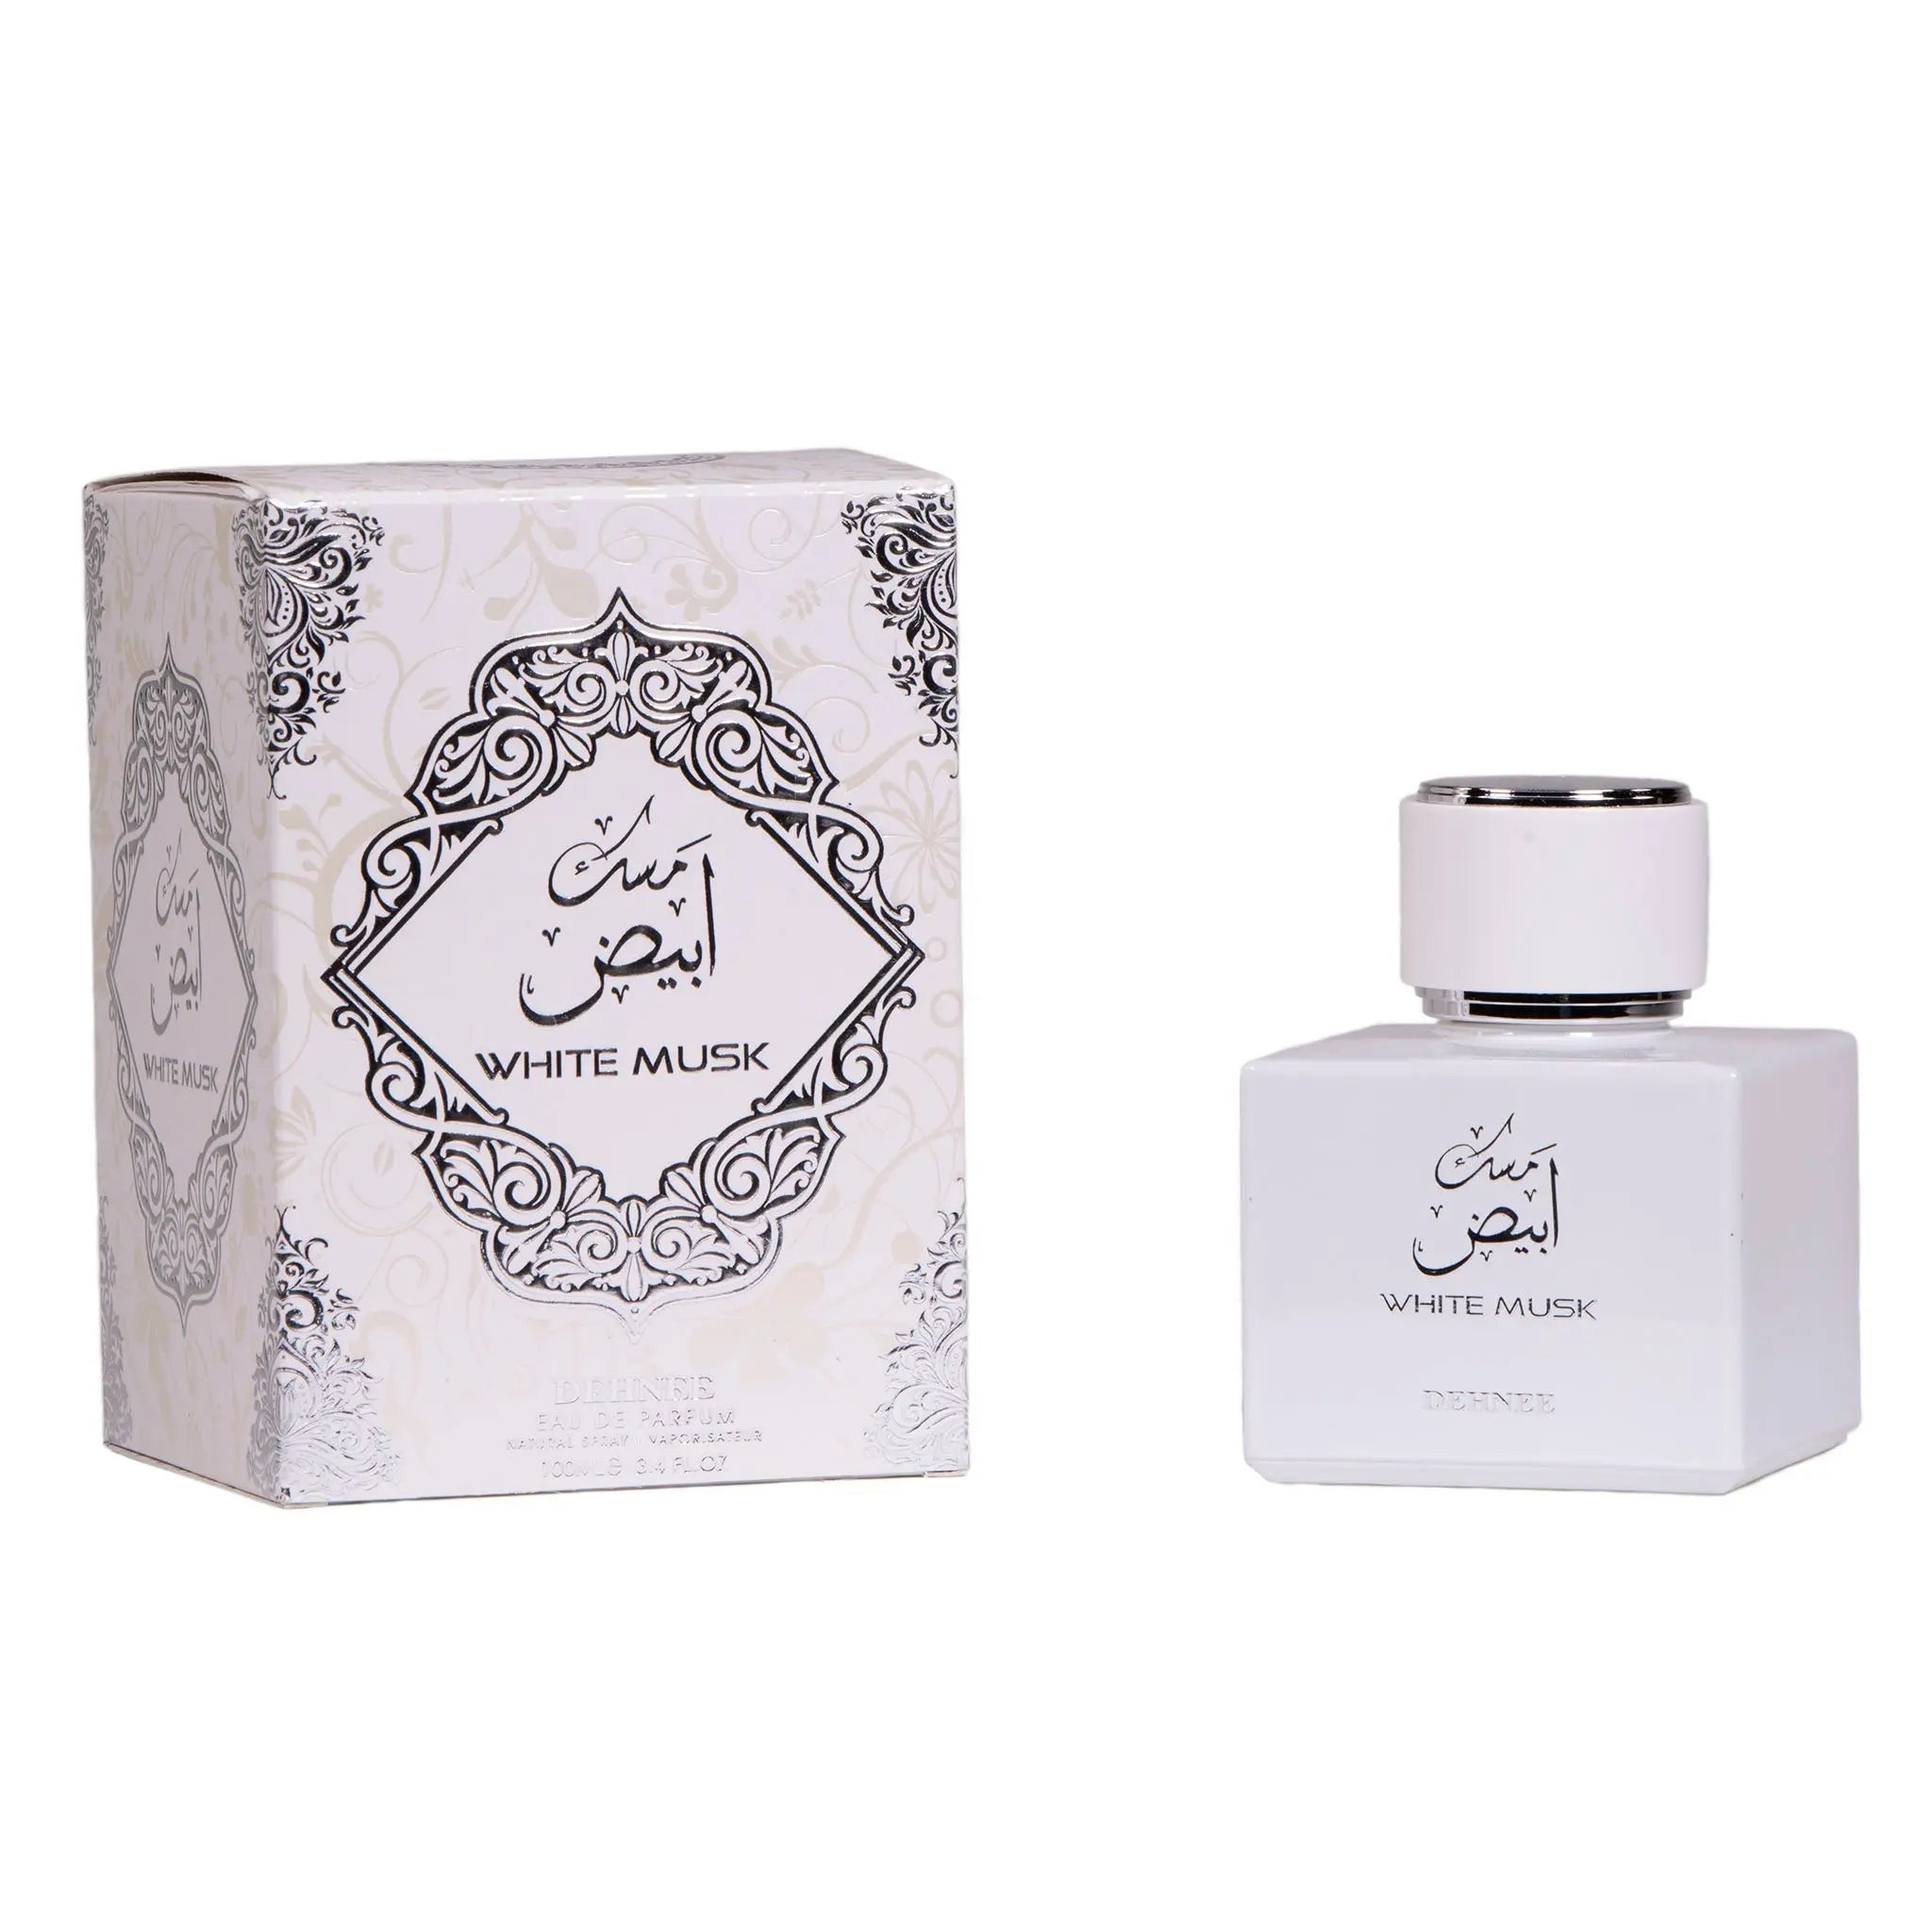 A matte white square glass perfume bottle with a silver cap, featuring a label with "WHITE MUSK" in English and Arabic script. The bottle is positioned next to its box, which carries a similar design with ornate black and grey floral patterns and the "WHITE MUSK" label within a decorative frame. The box also has the text "DEHNEE EAU DE PARFUM 100ML 3.4 FL.OZ" at the bottom.